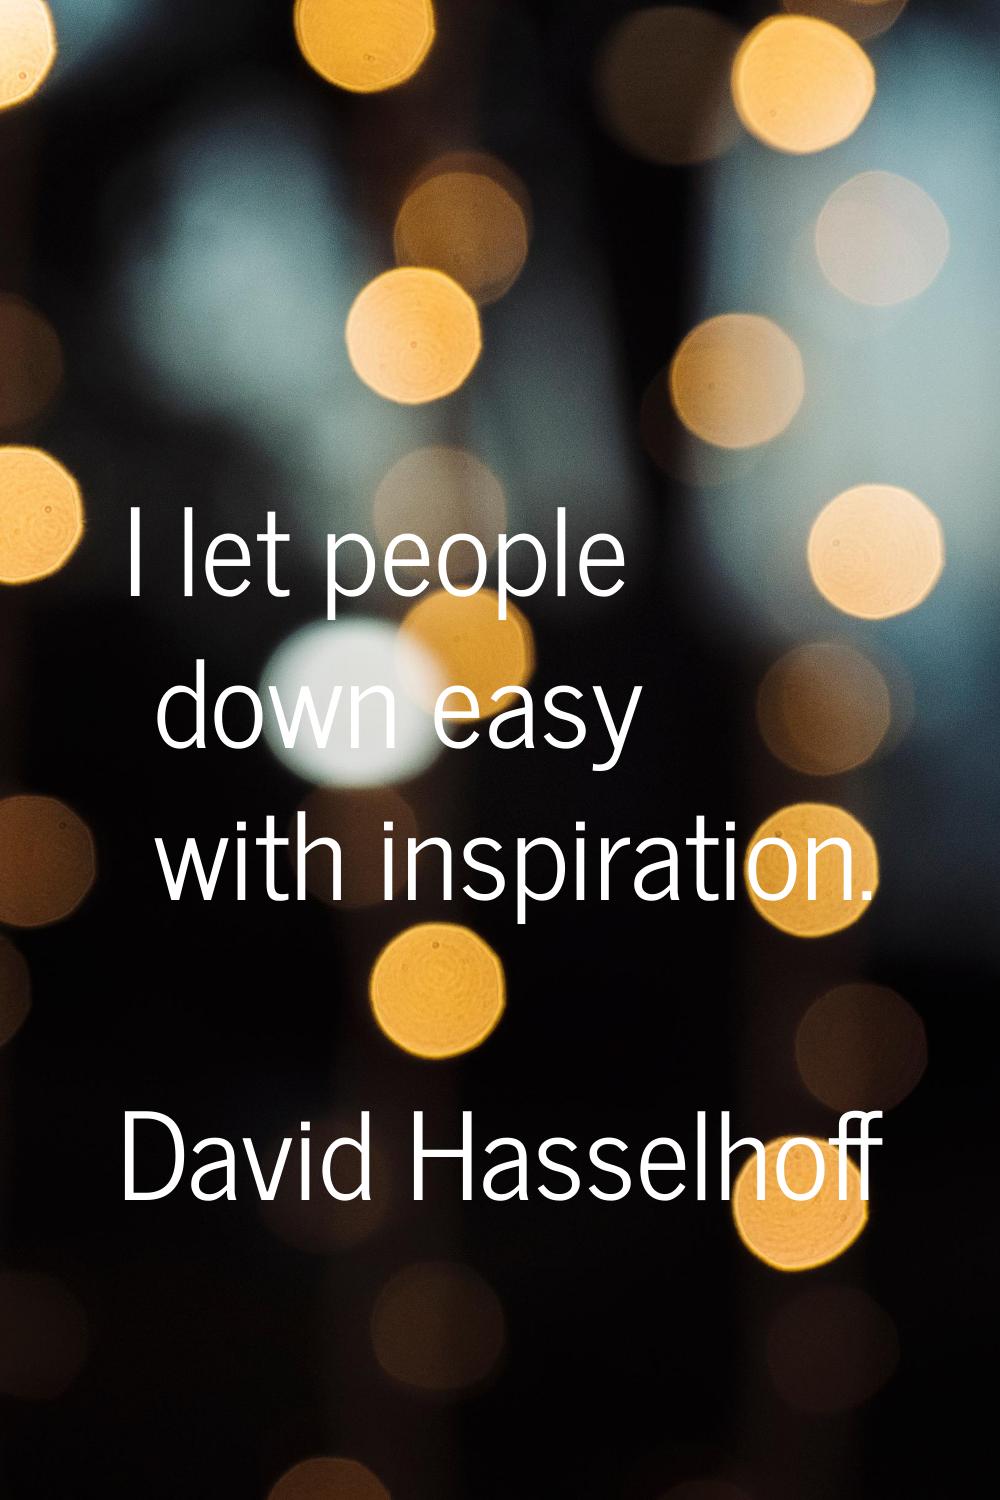 I let people down easy with inspiration.